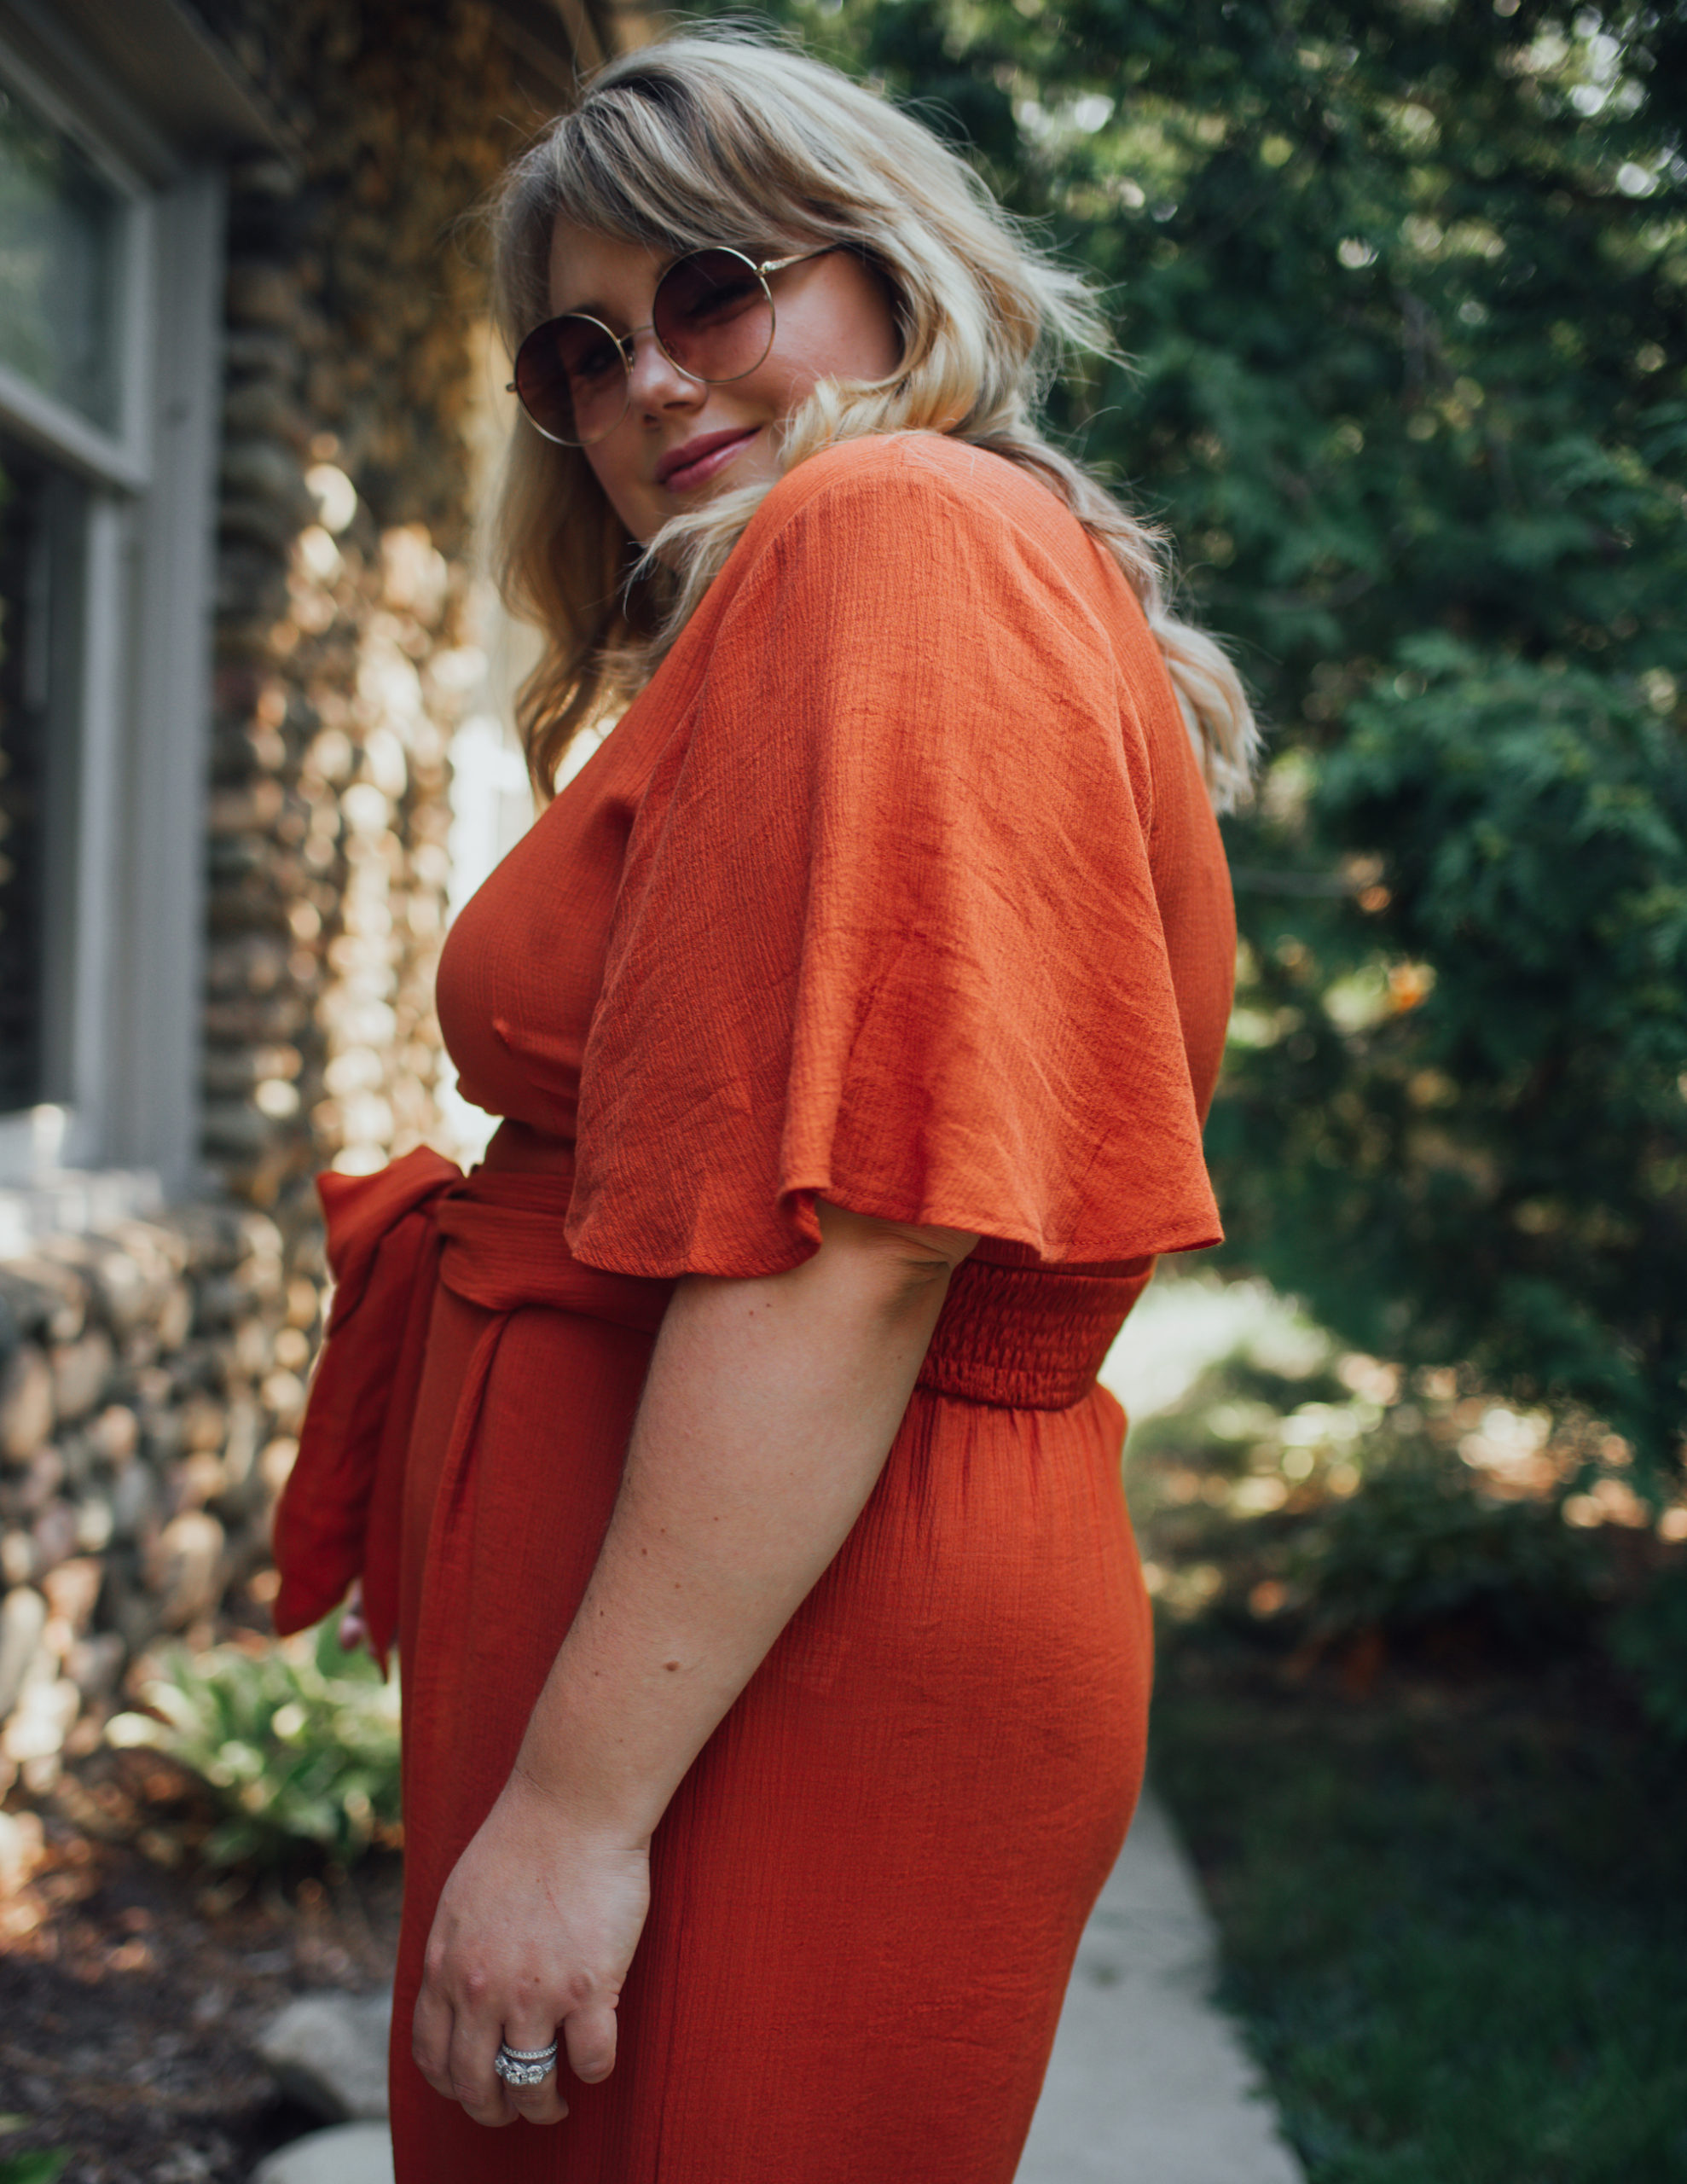 End of Summer Outfits With Chic Soul. Sharing a sporty and spice look from Chic Soul, the plus size boutique that has tons of options! 